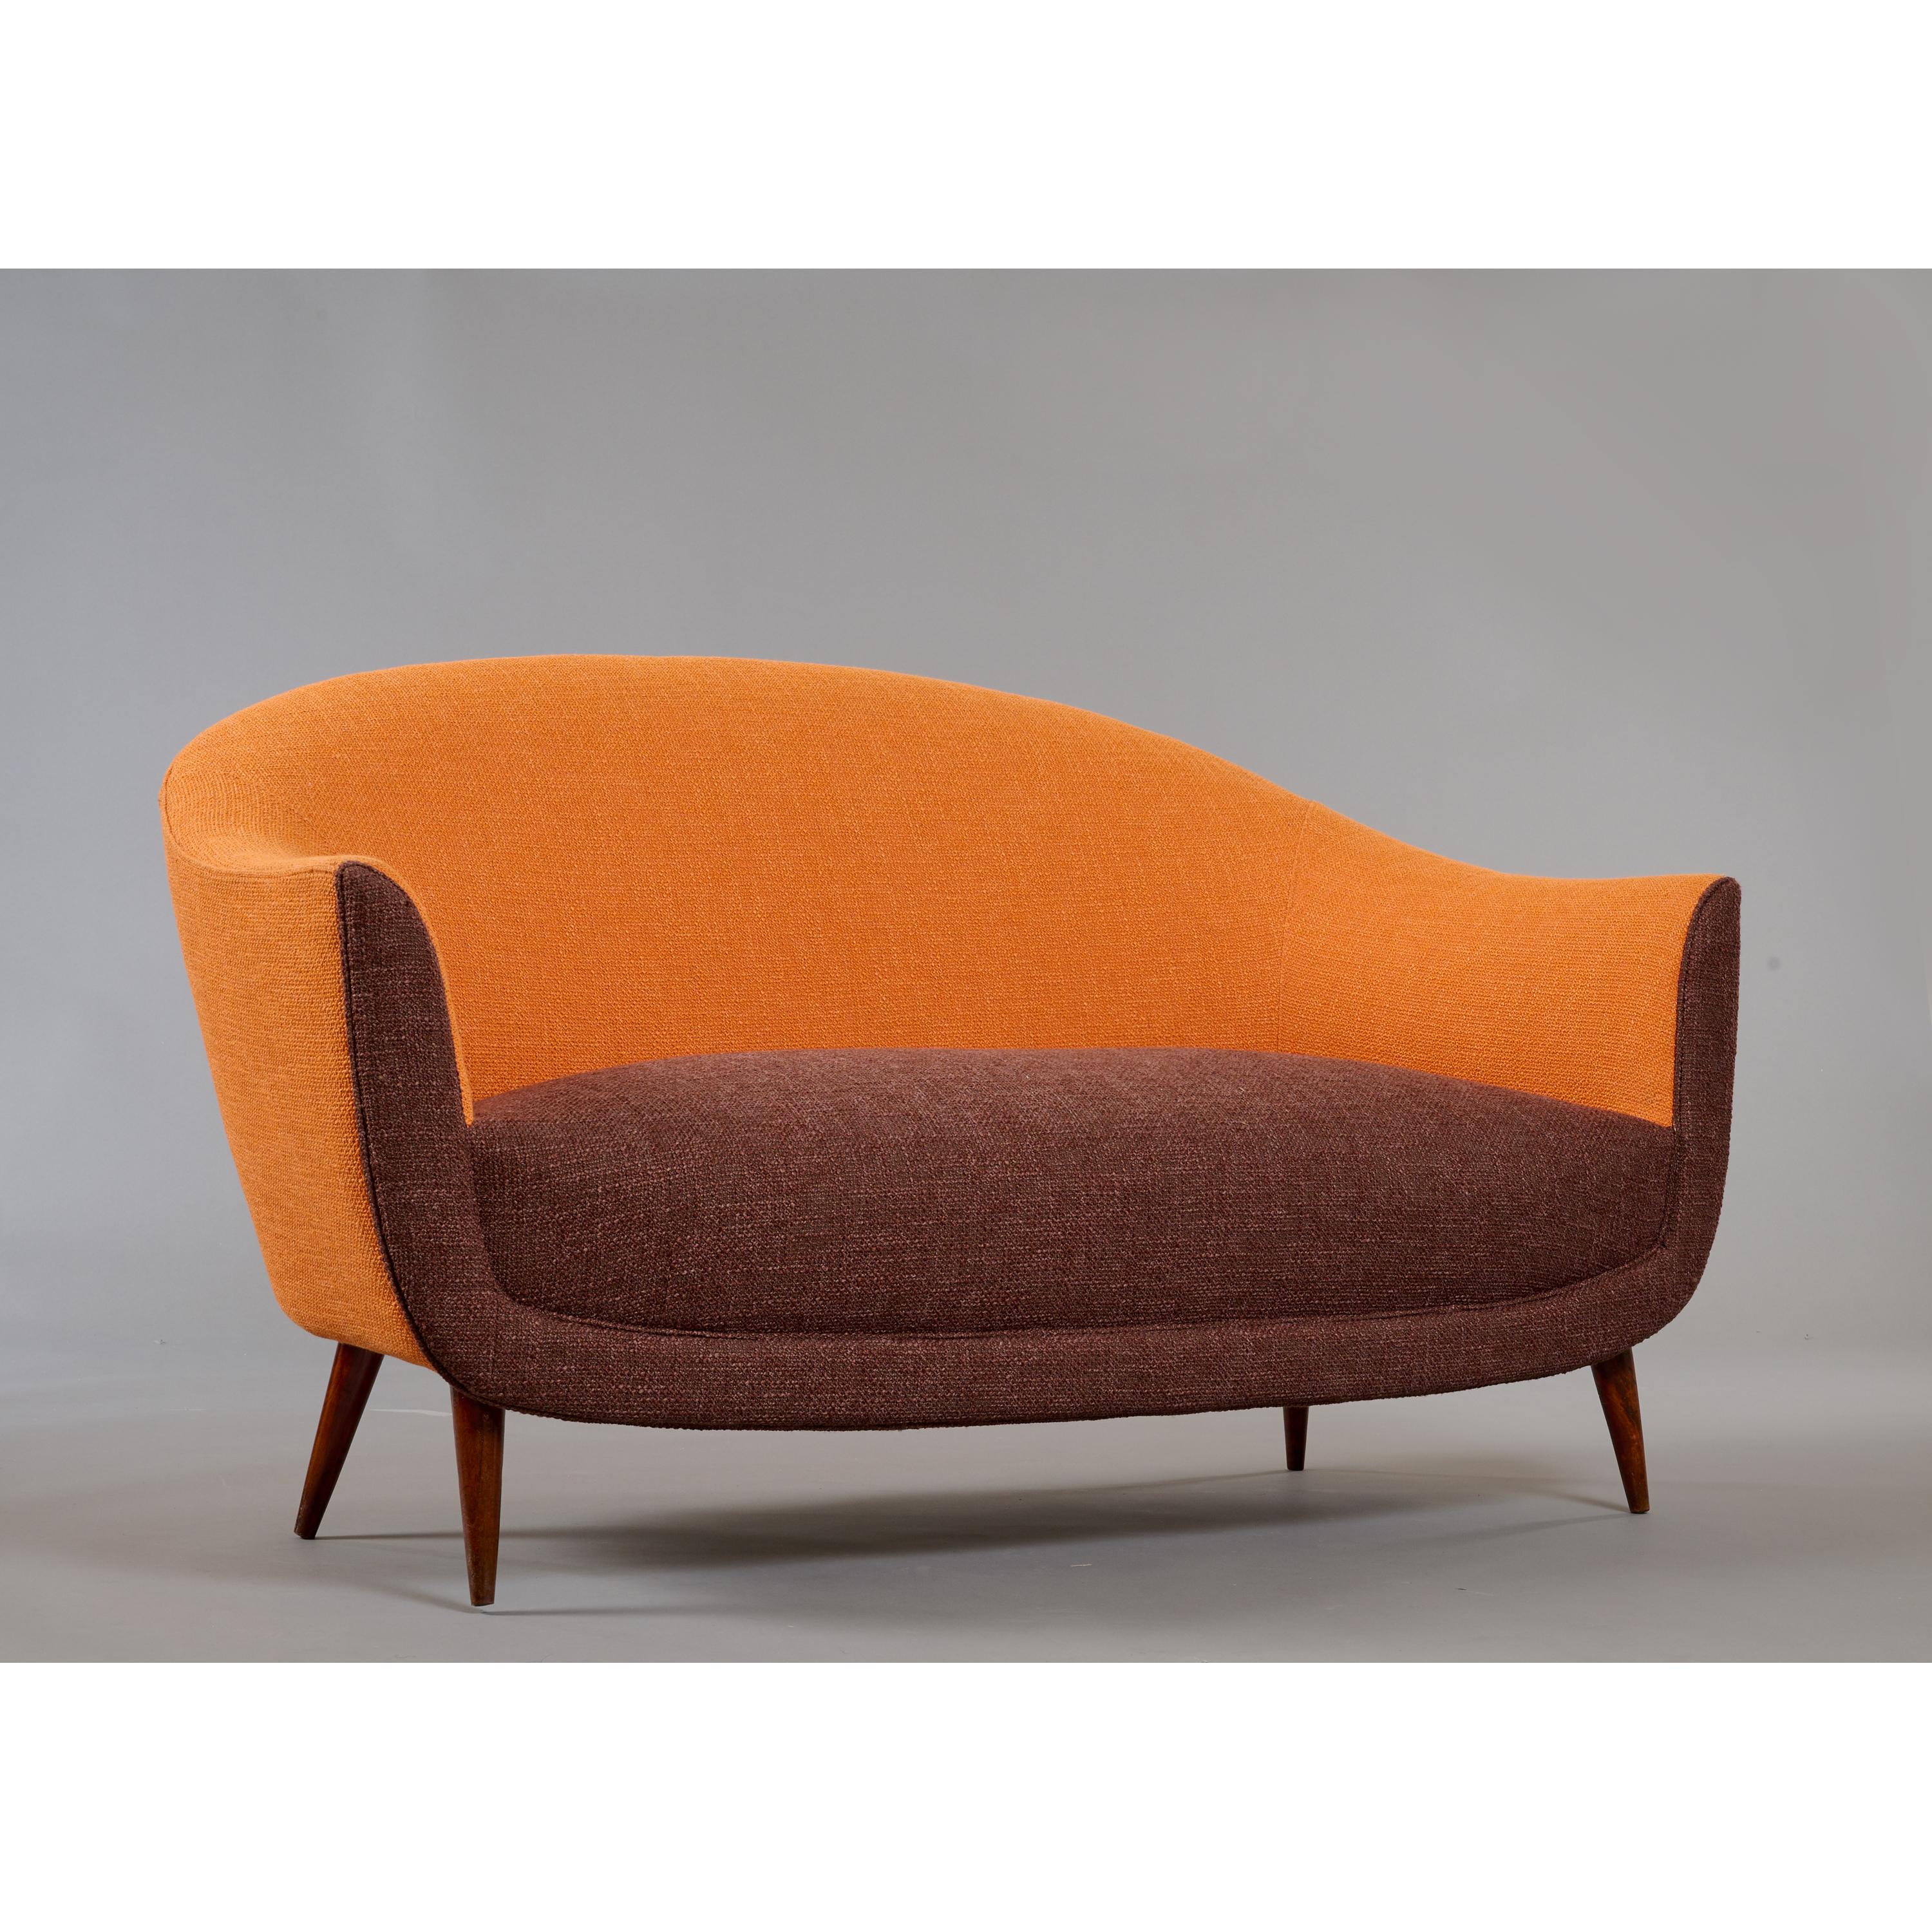 Curved ITSO Federico Munari Settee in Wood with Orange Upholstery, Italy 1950s  For Sale 3